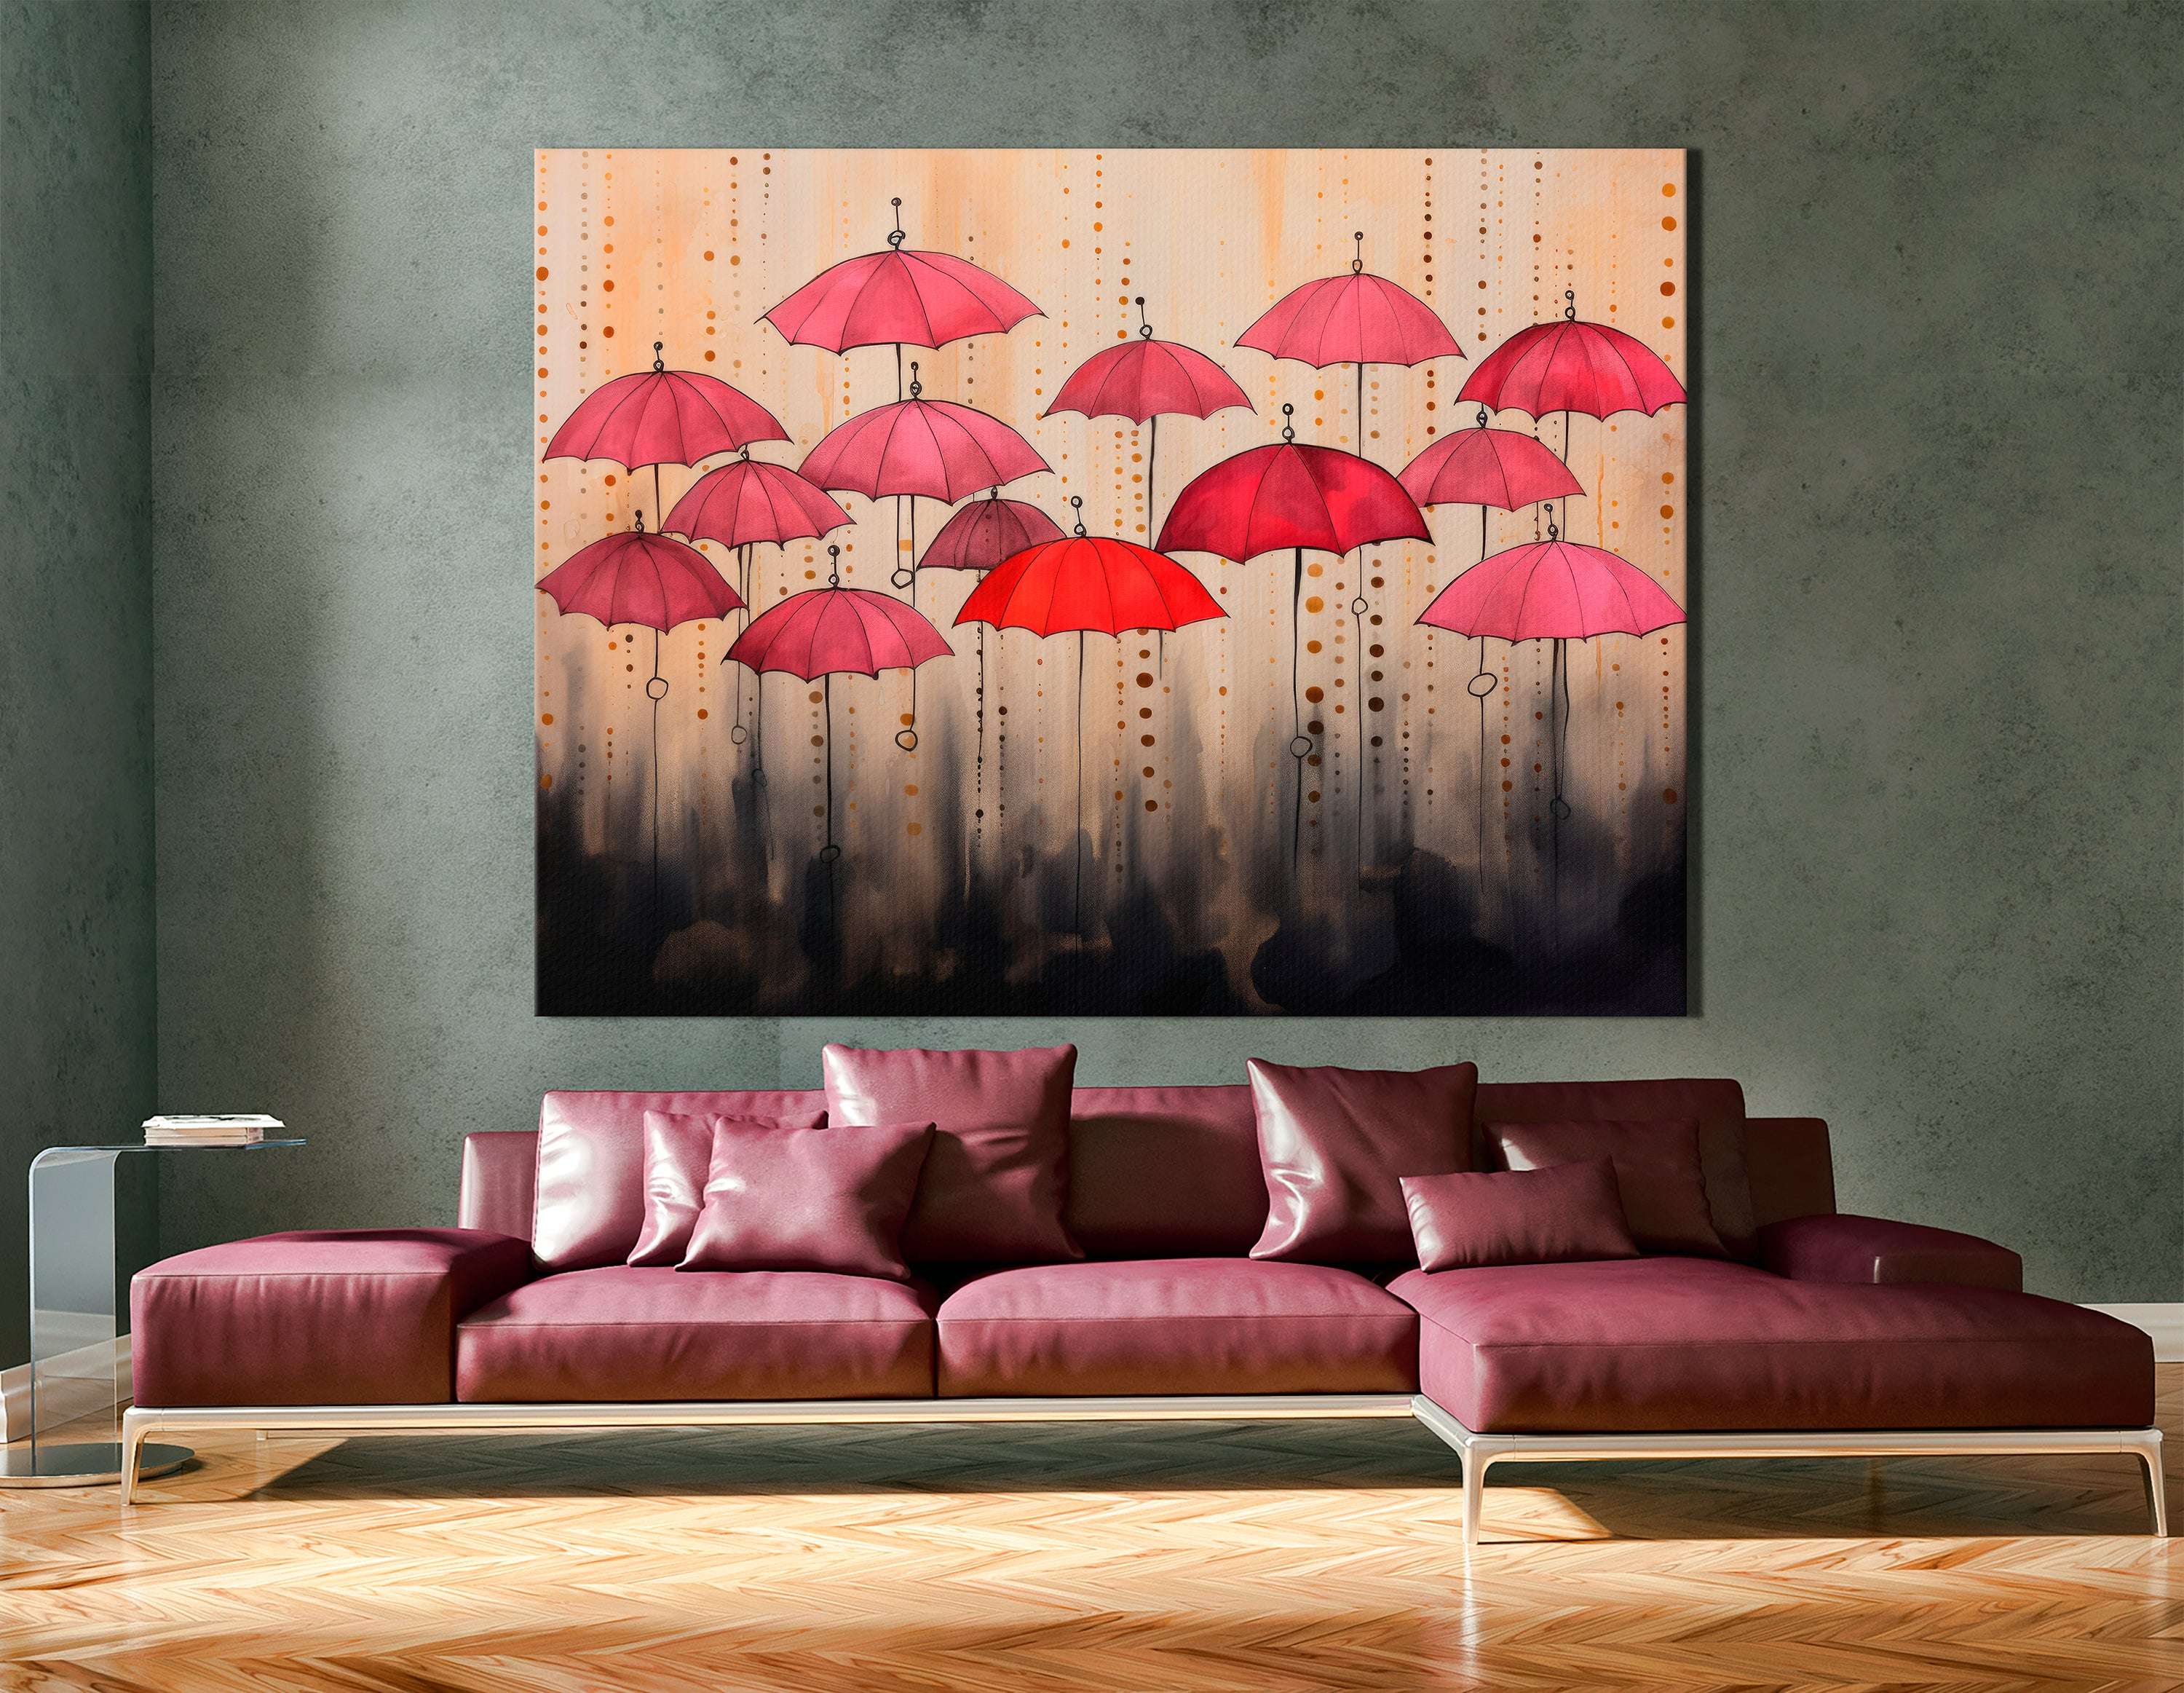 Pink and Red Umbrellas in Urban Fairy Tale - Canvas Print - Artoholica Ready to Hang Canvas Print